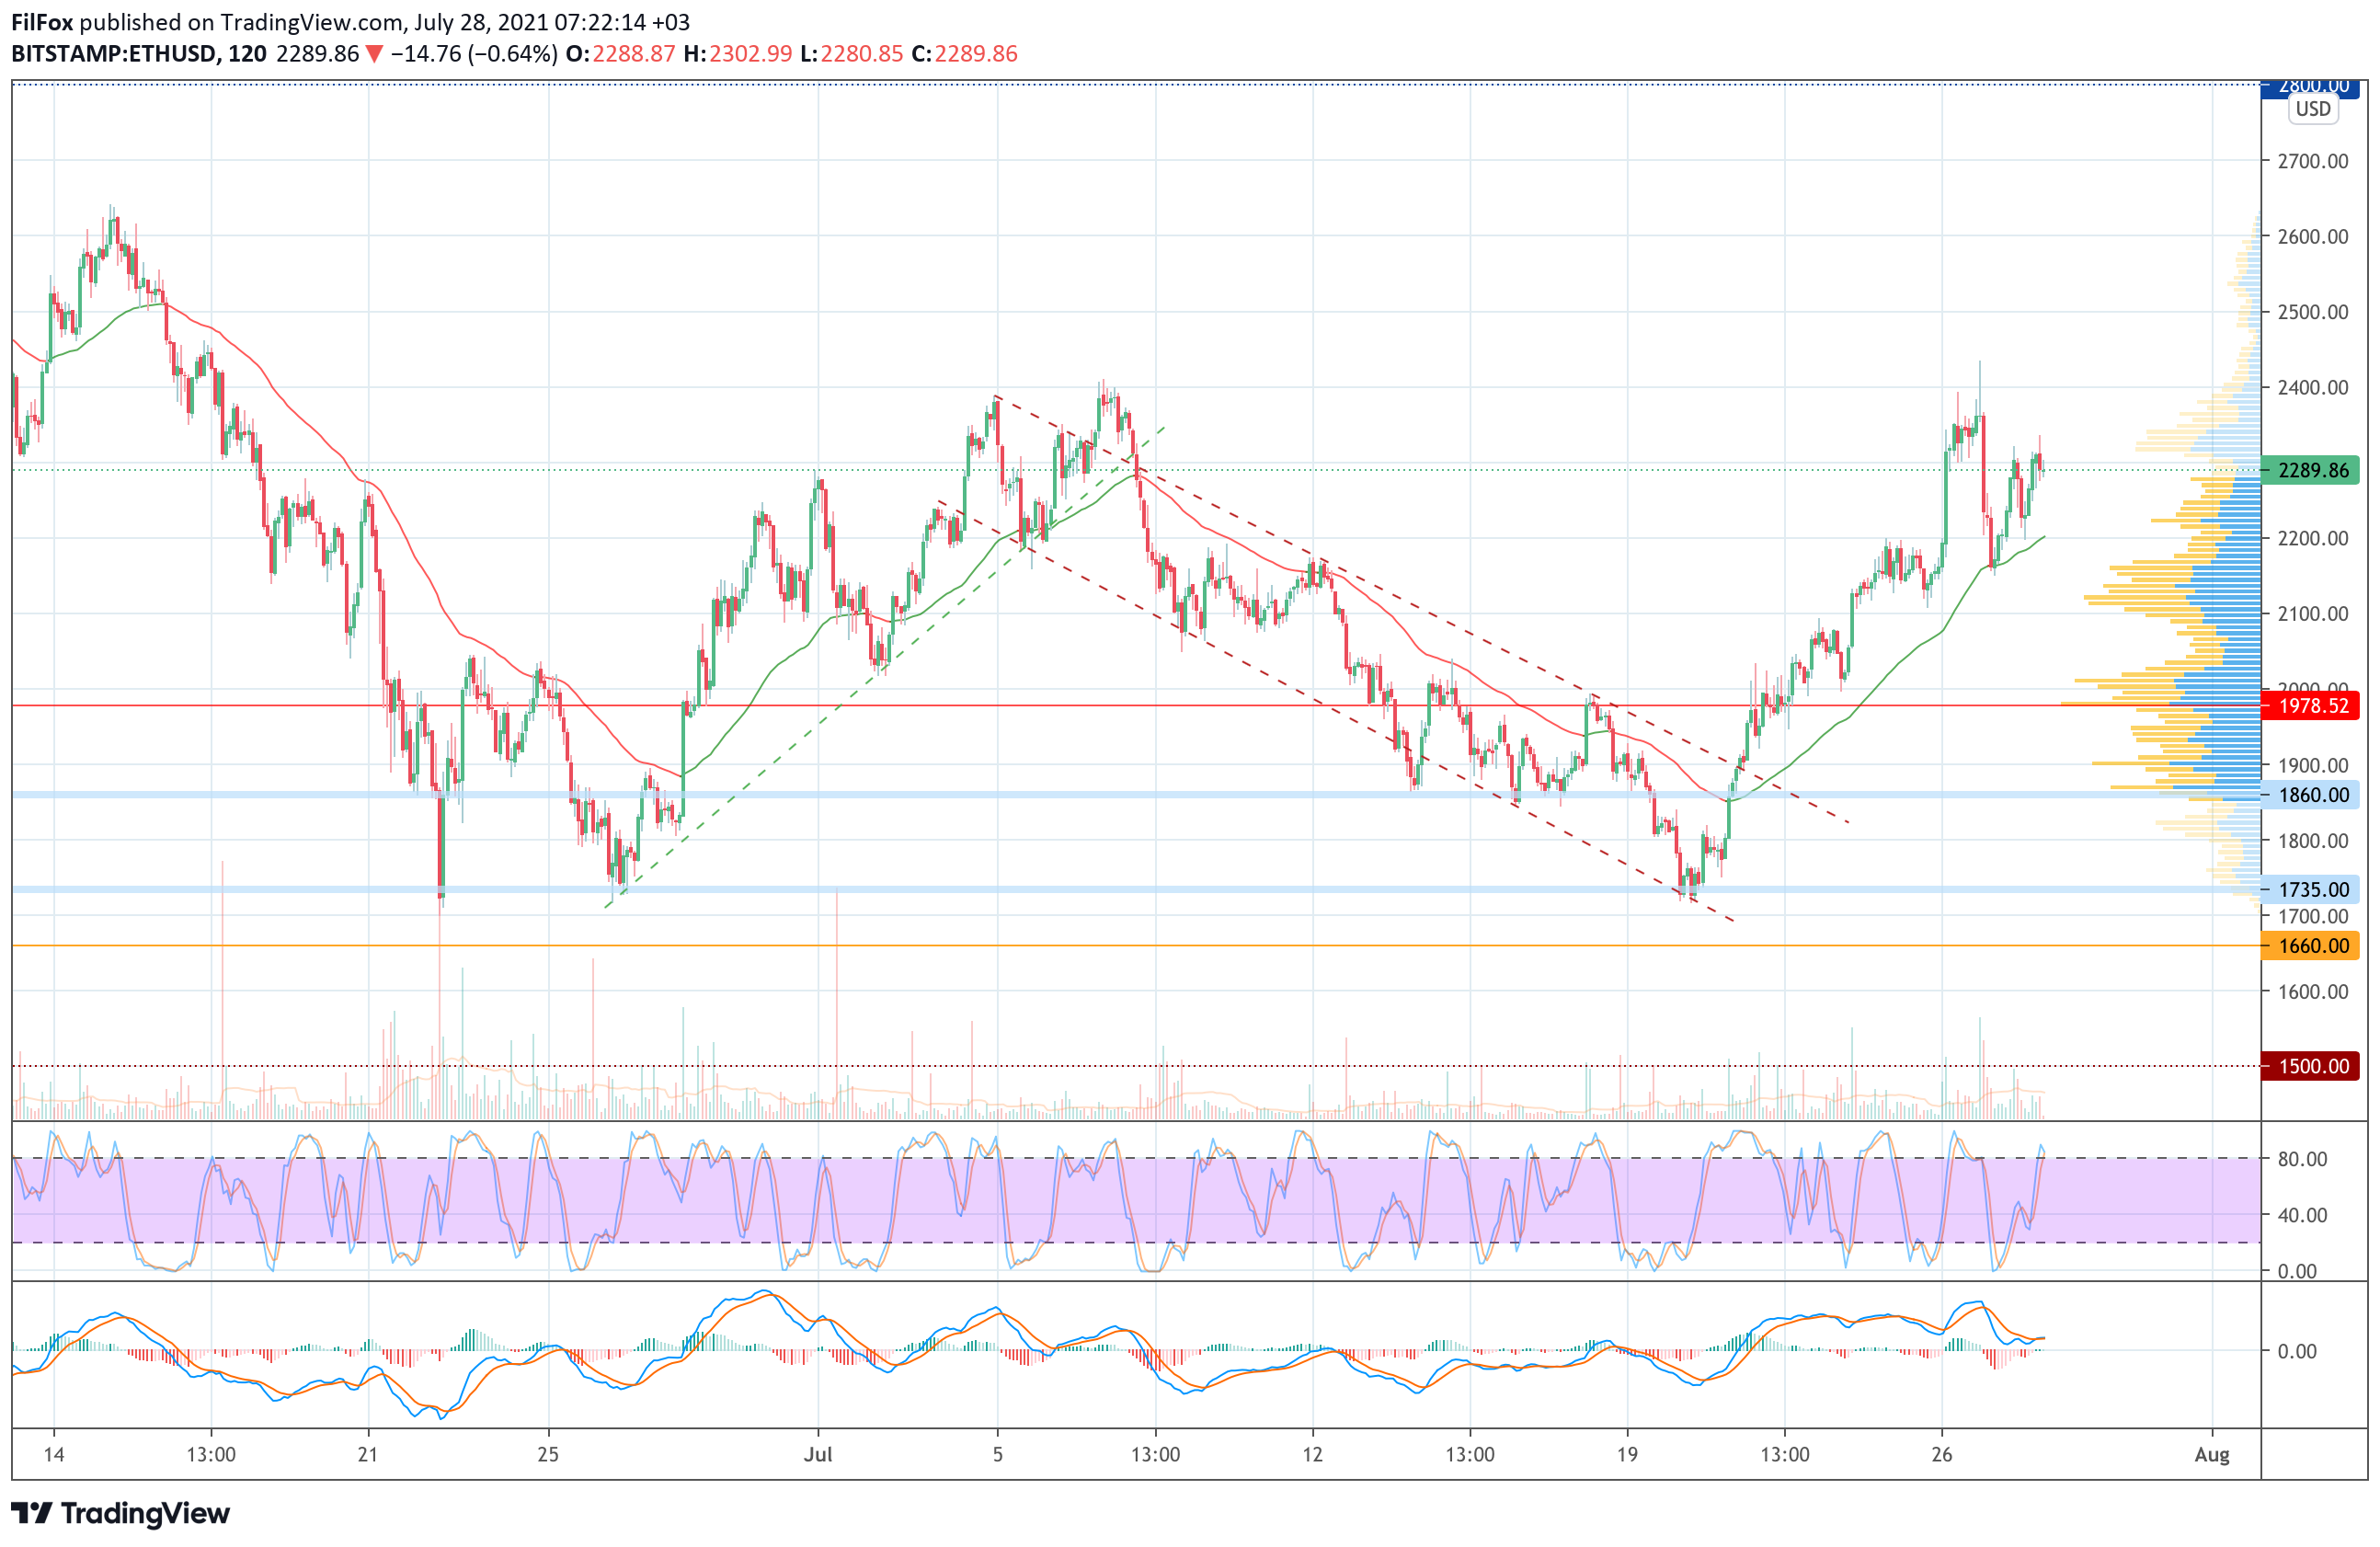 Analysis of the prices of Bitcoin, Ethereum, XRP for 07/28/2021